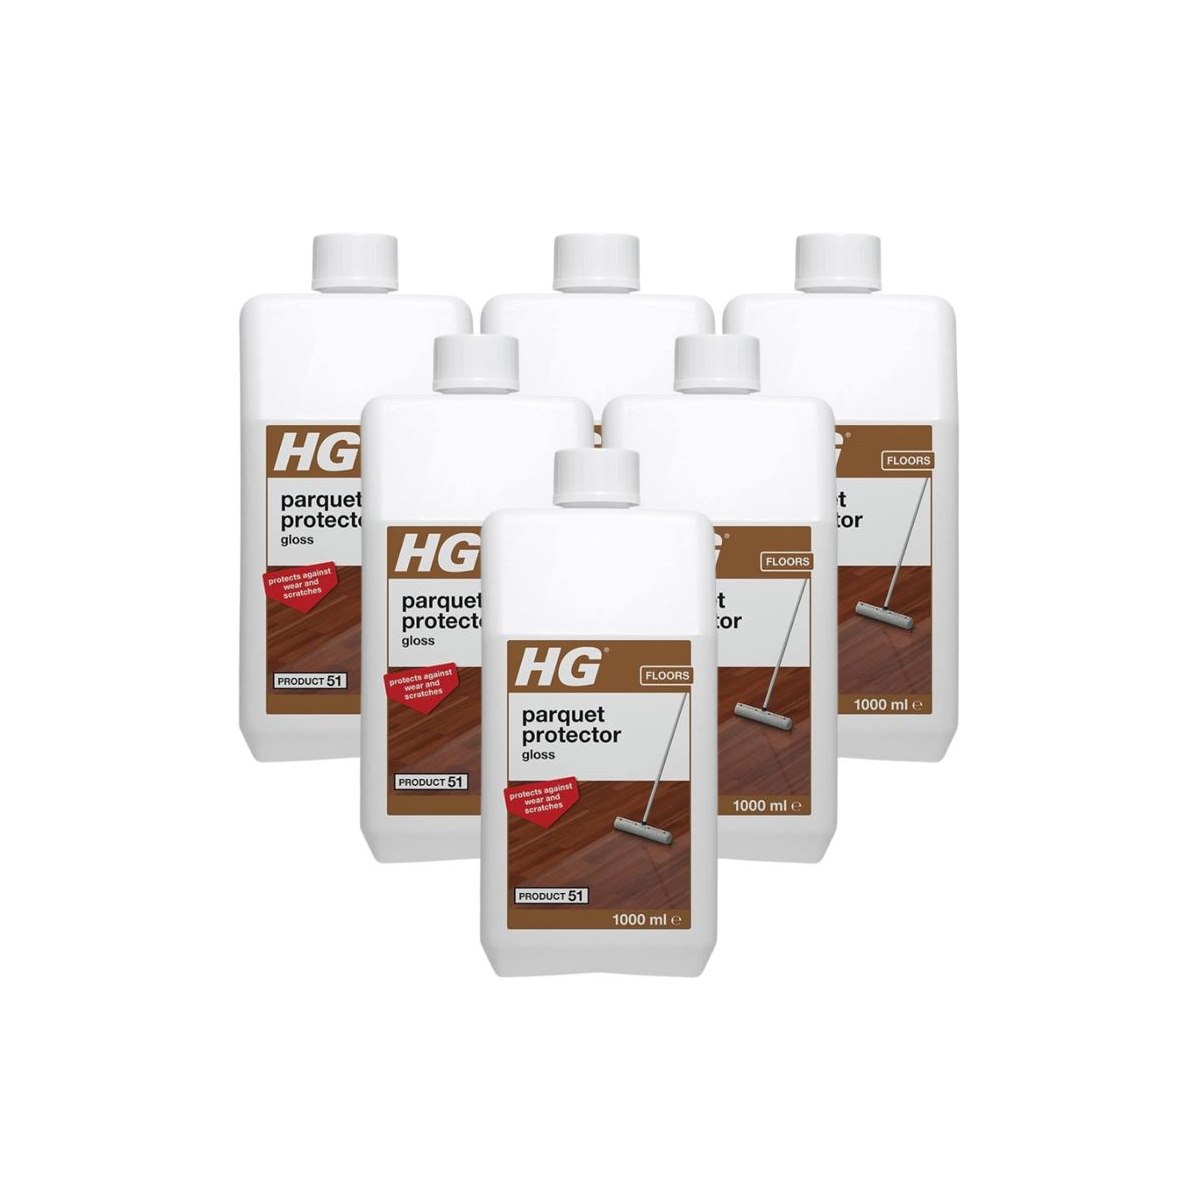 Case 6x Hg Parquet Protector Gloss 1 Litre Product 51